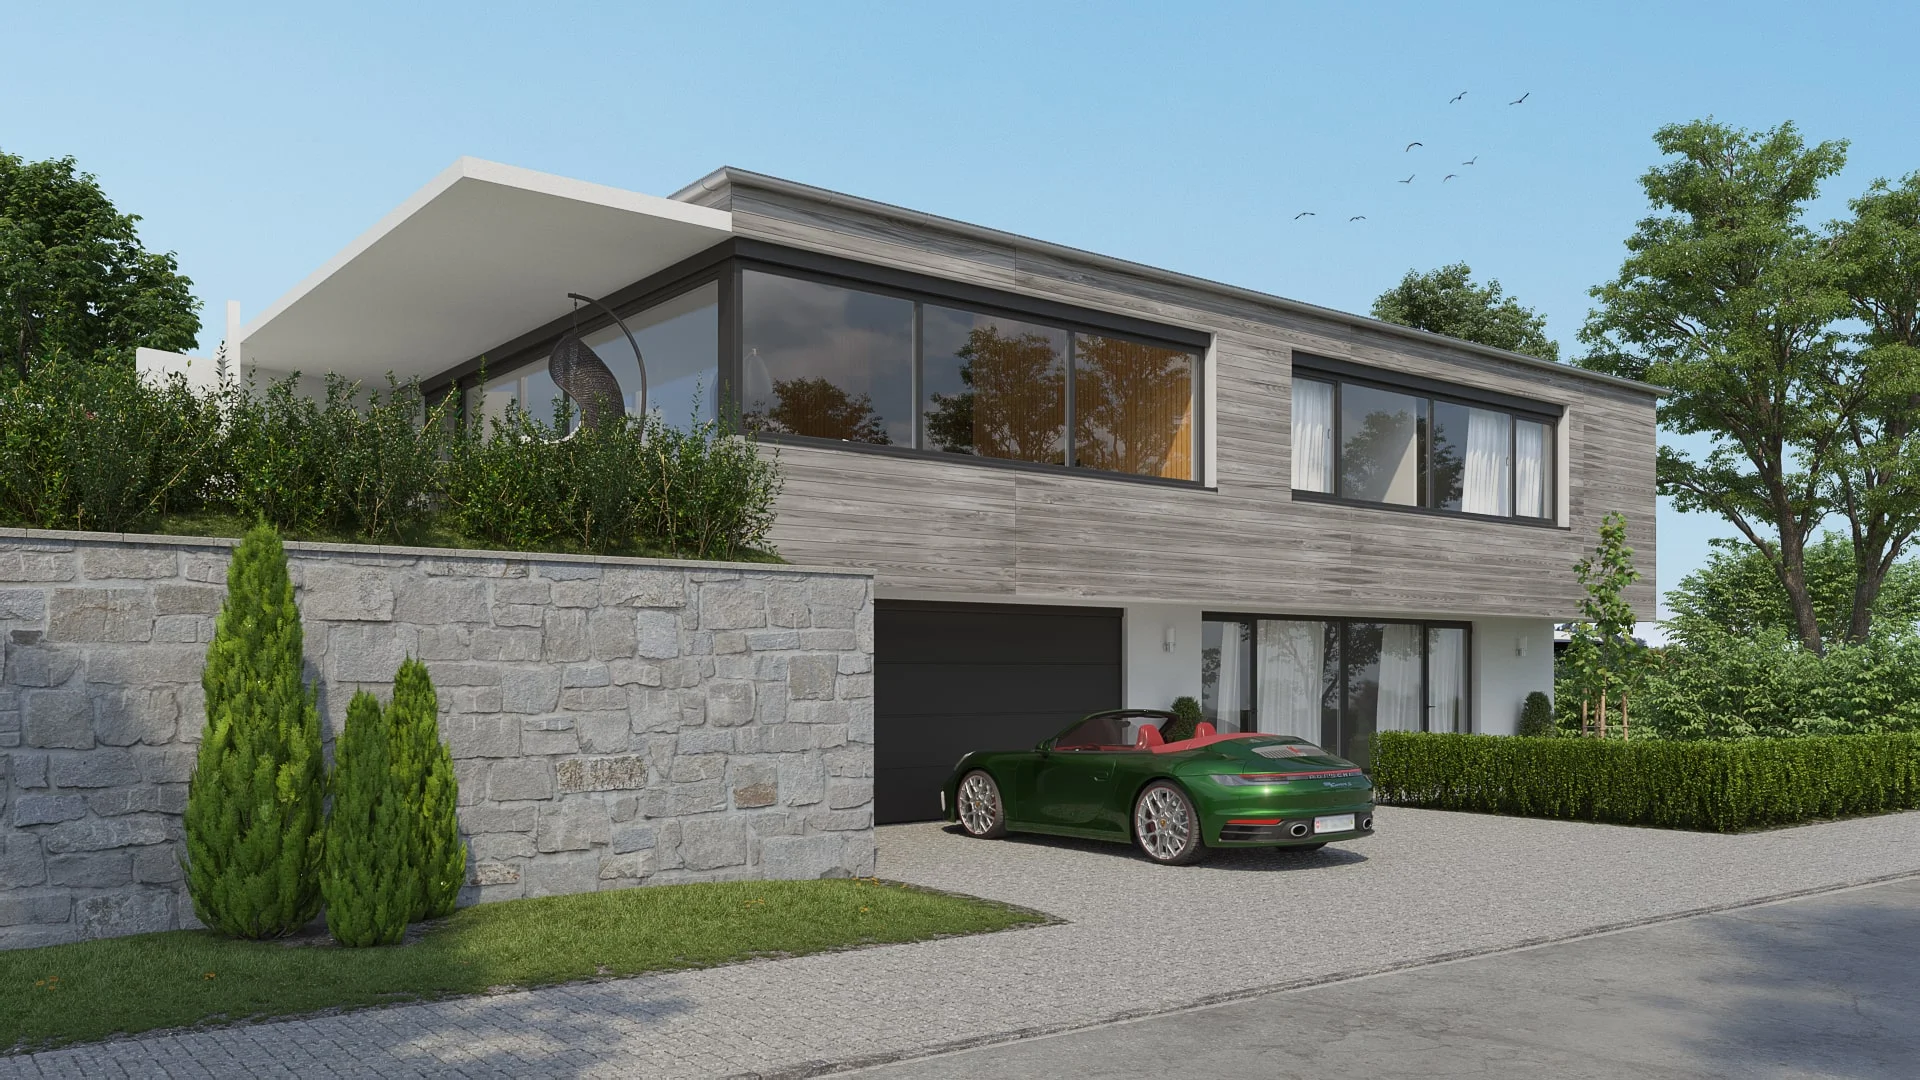 Architectural visualization. Single-family house. Street view